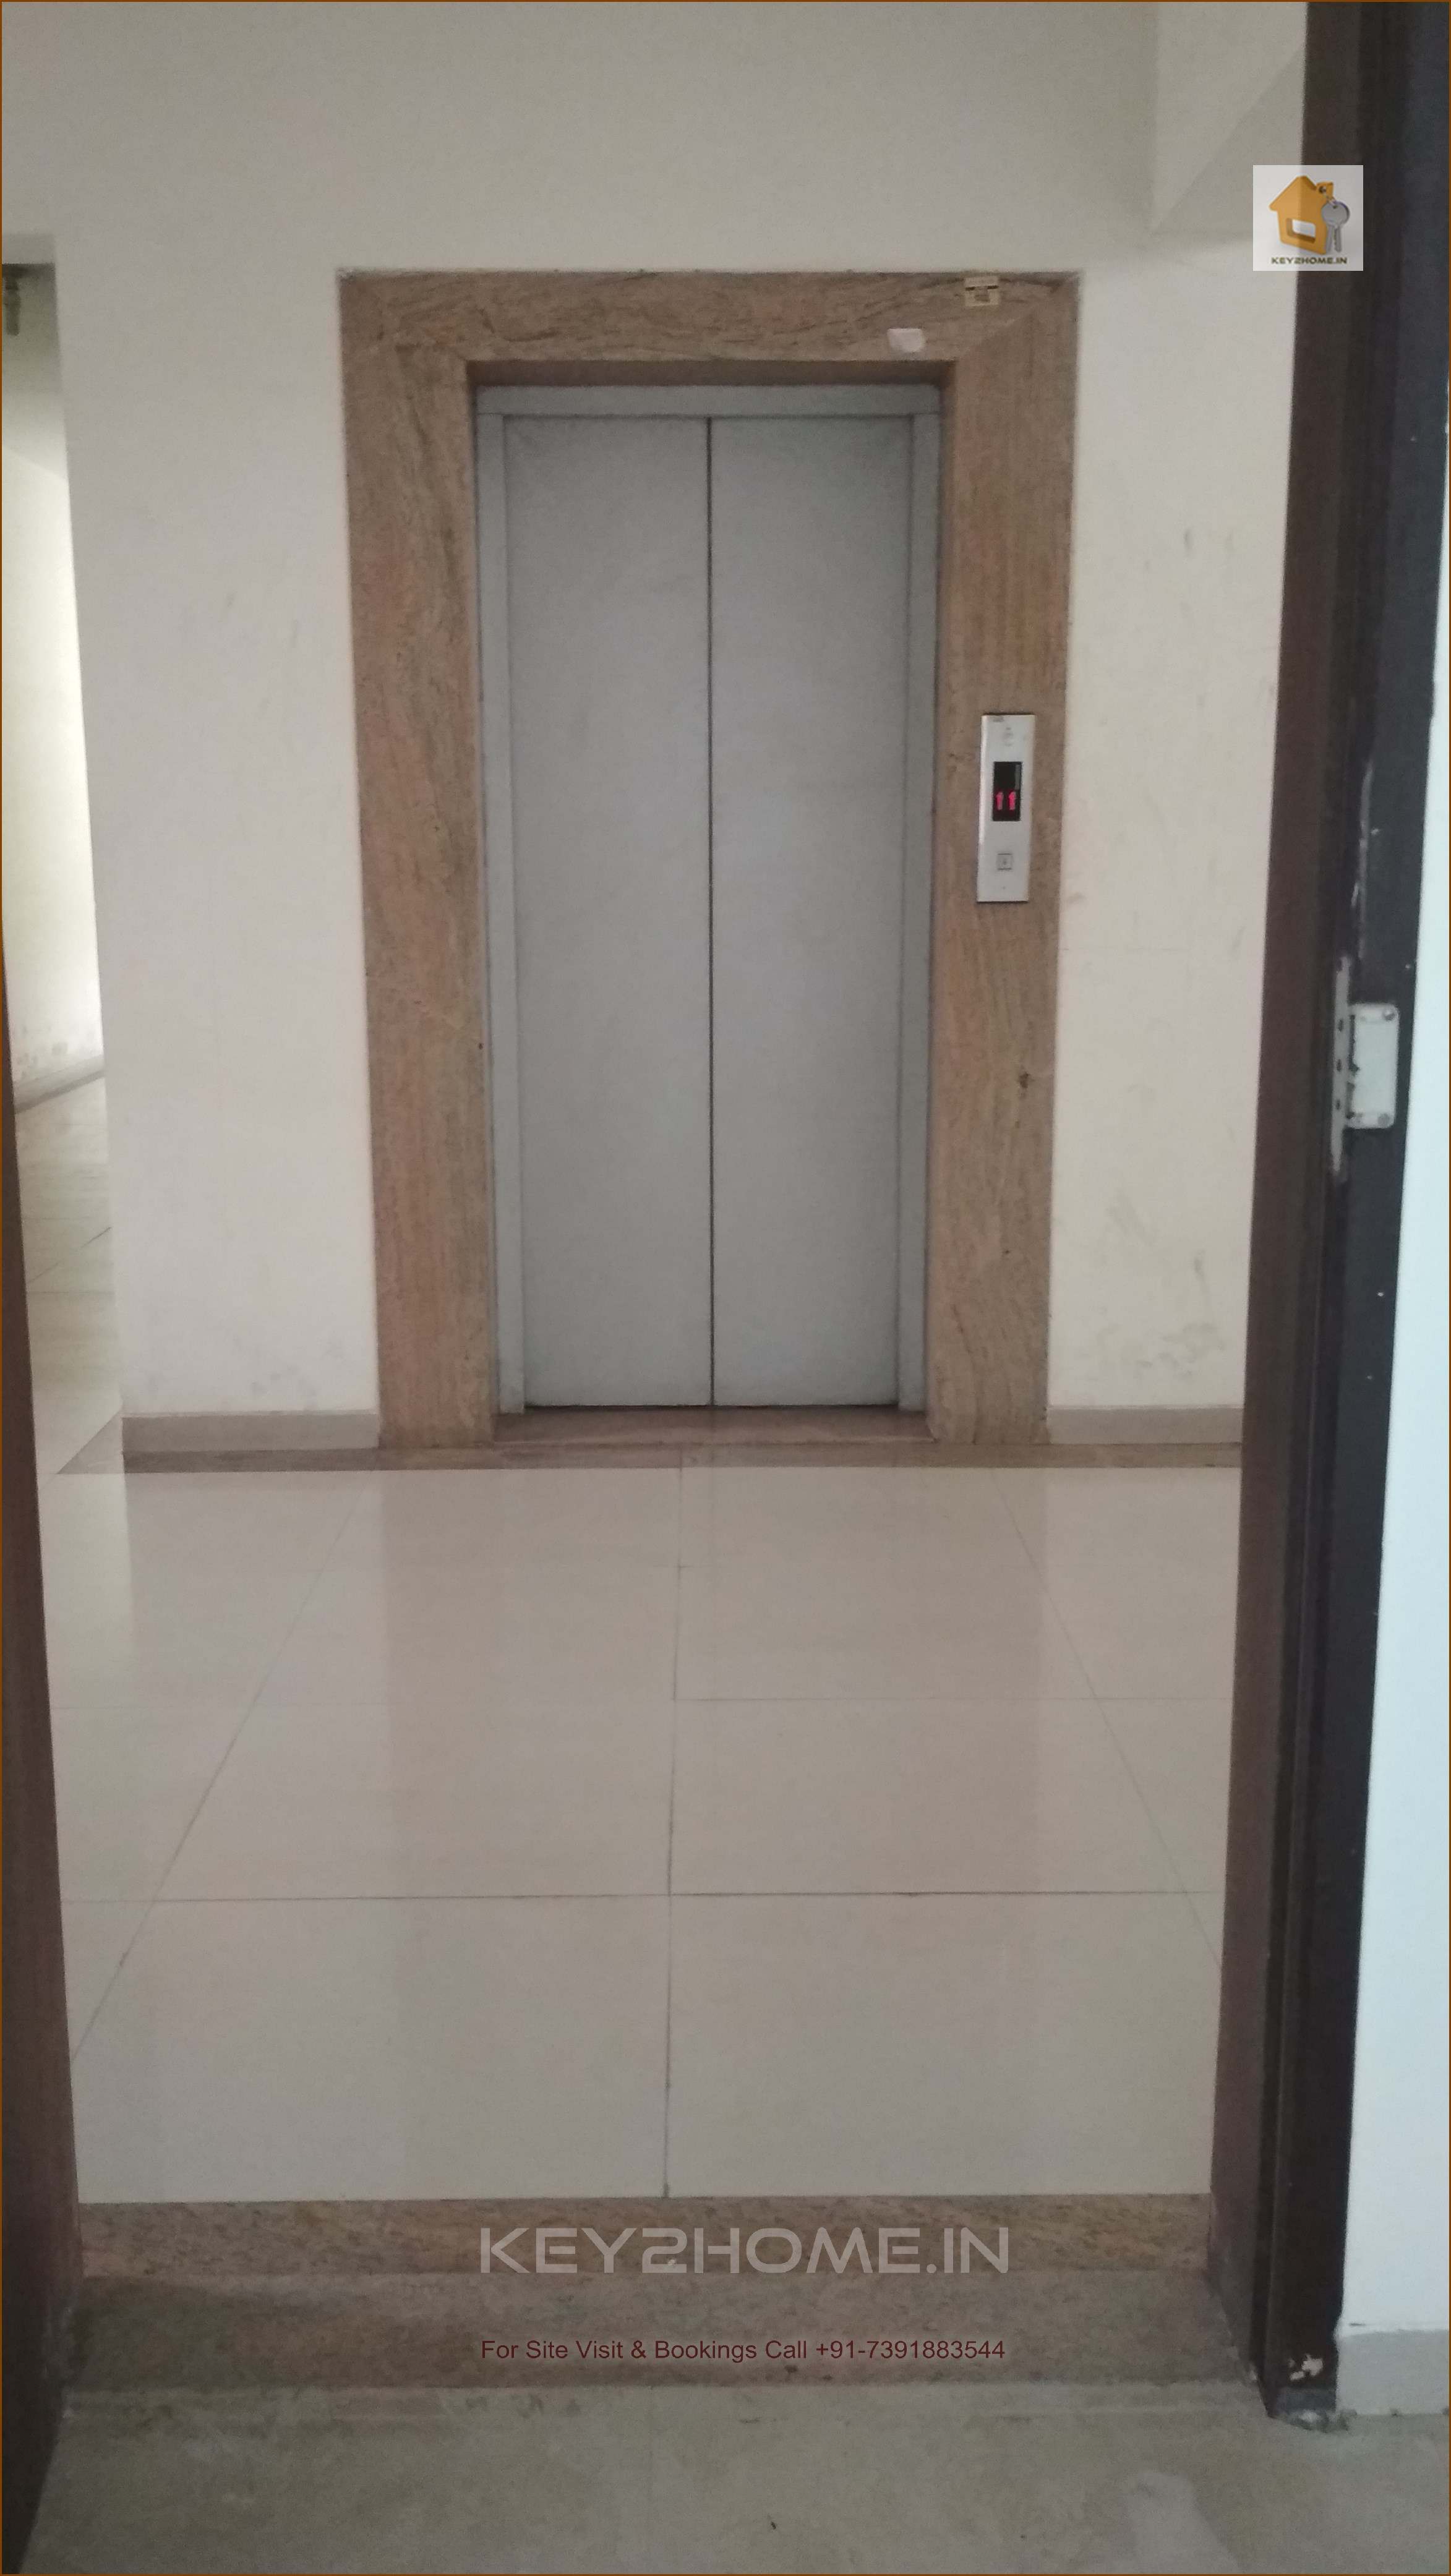 Beverly Hills Hinjewadi 2bhk resale lift in front of flat